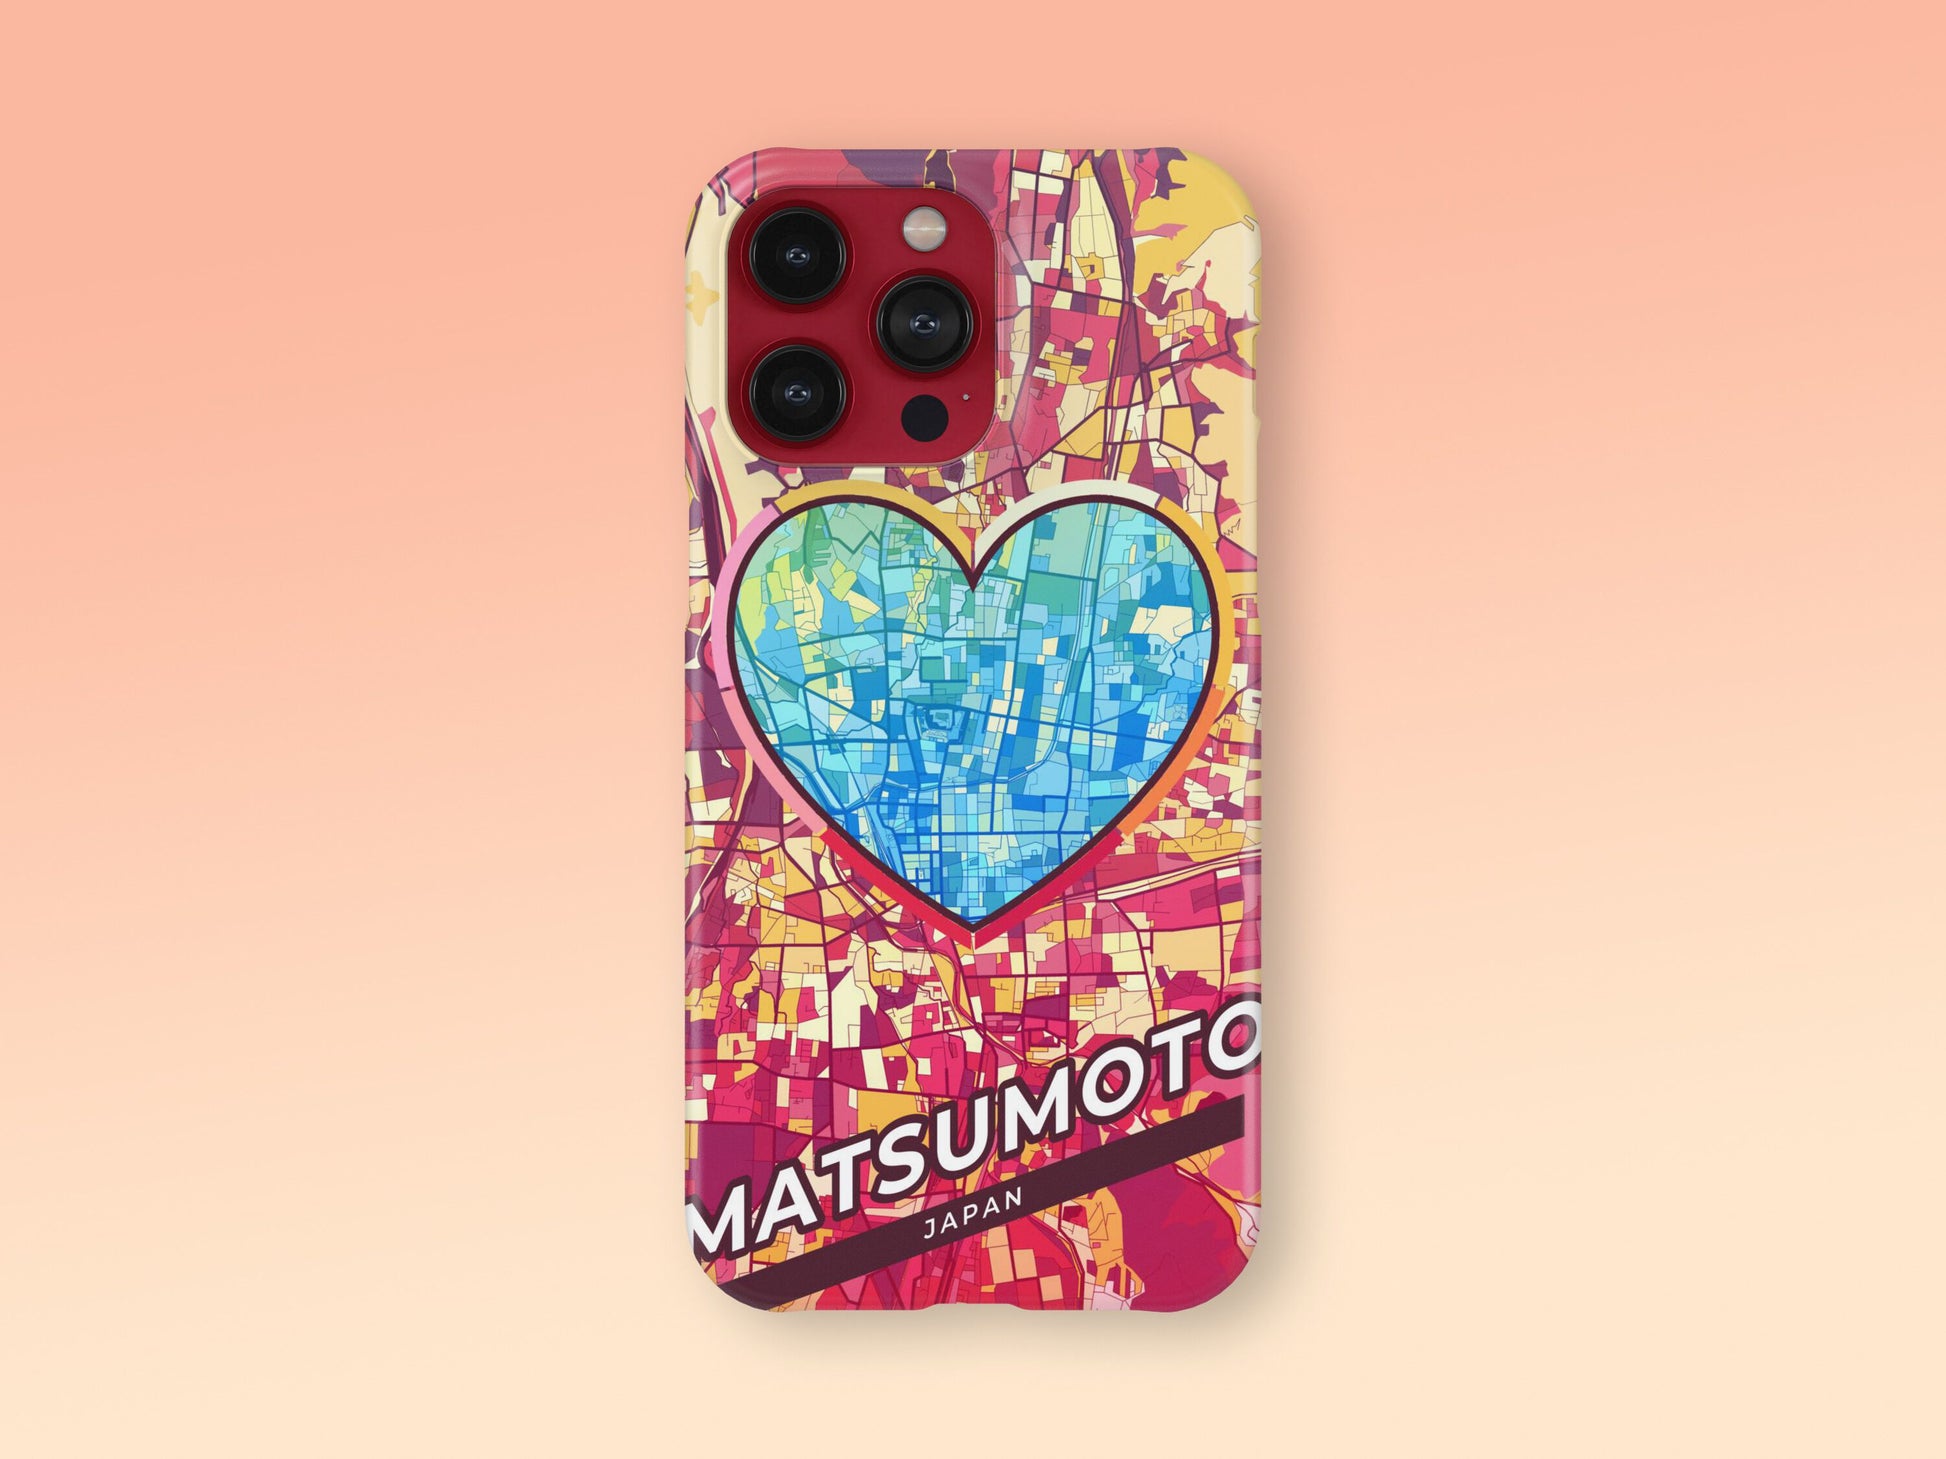 Matsumoto Japan slim phone case with colorful icon. Birthday, wedding or housewarming gift. Couple match cases. 2